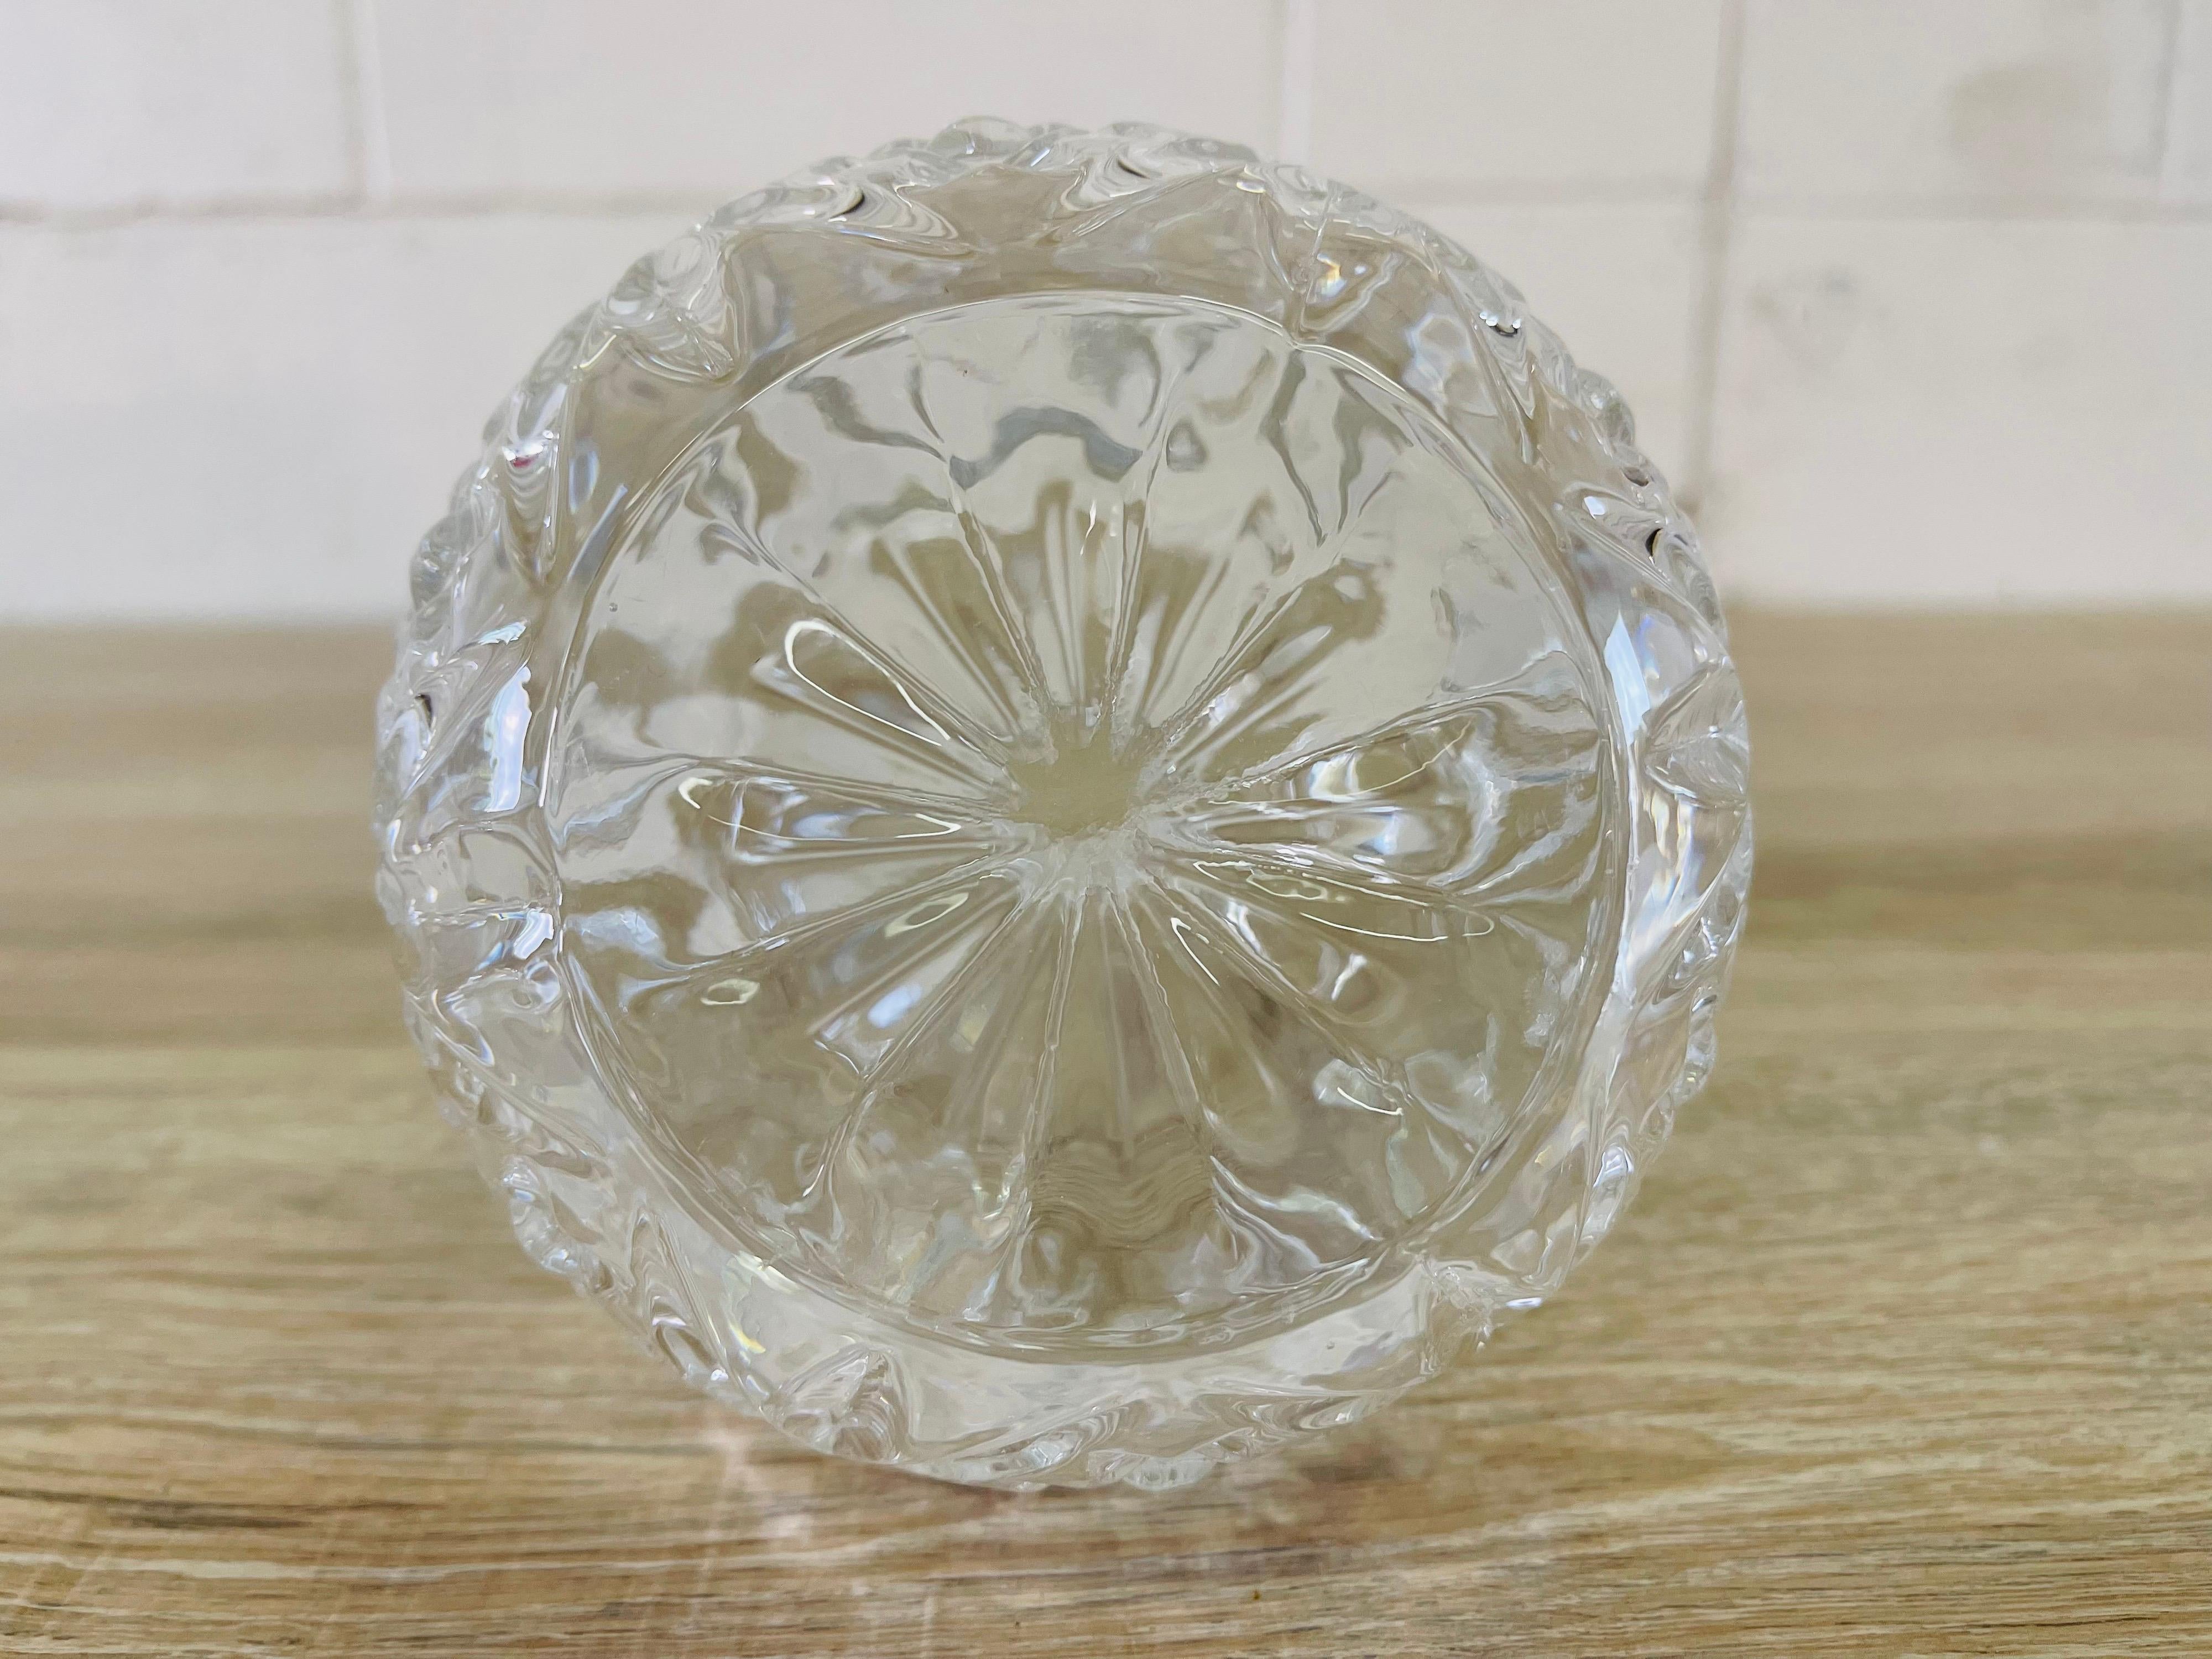 Irish Crystal Glass Decanter with Stopper In Good Condition For Sale In Amherst, NH